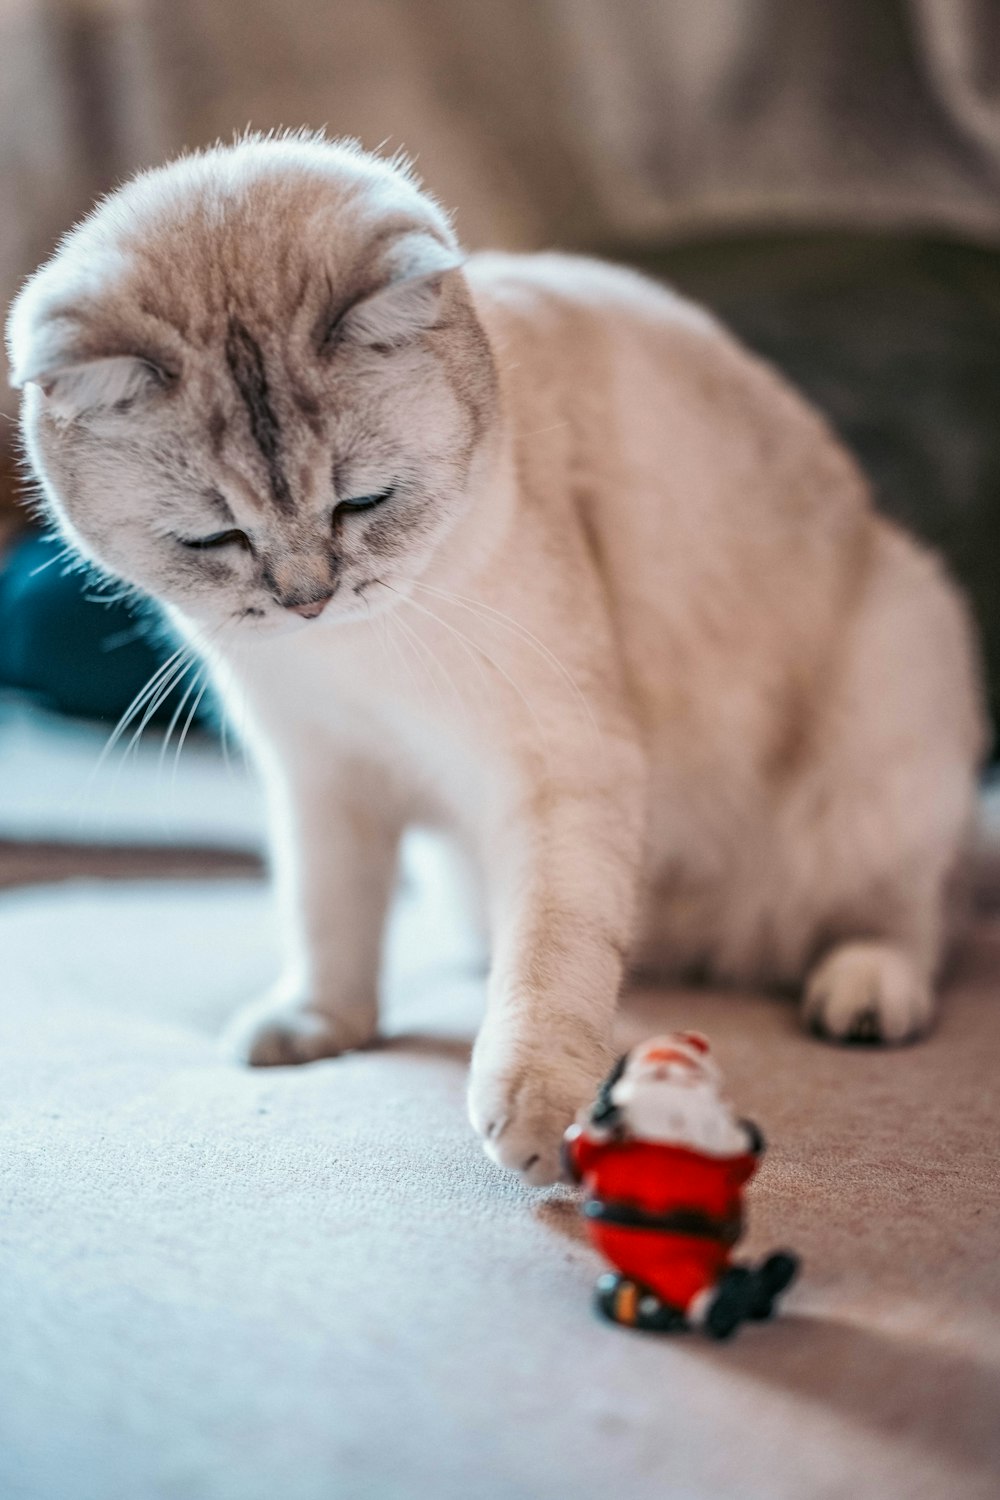 a cat playing with a toy car on the floor